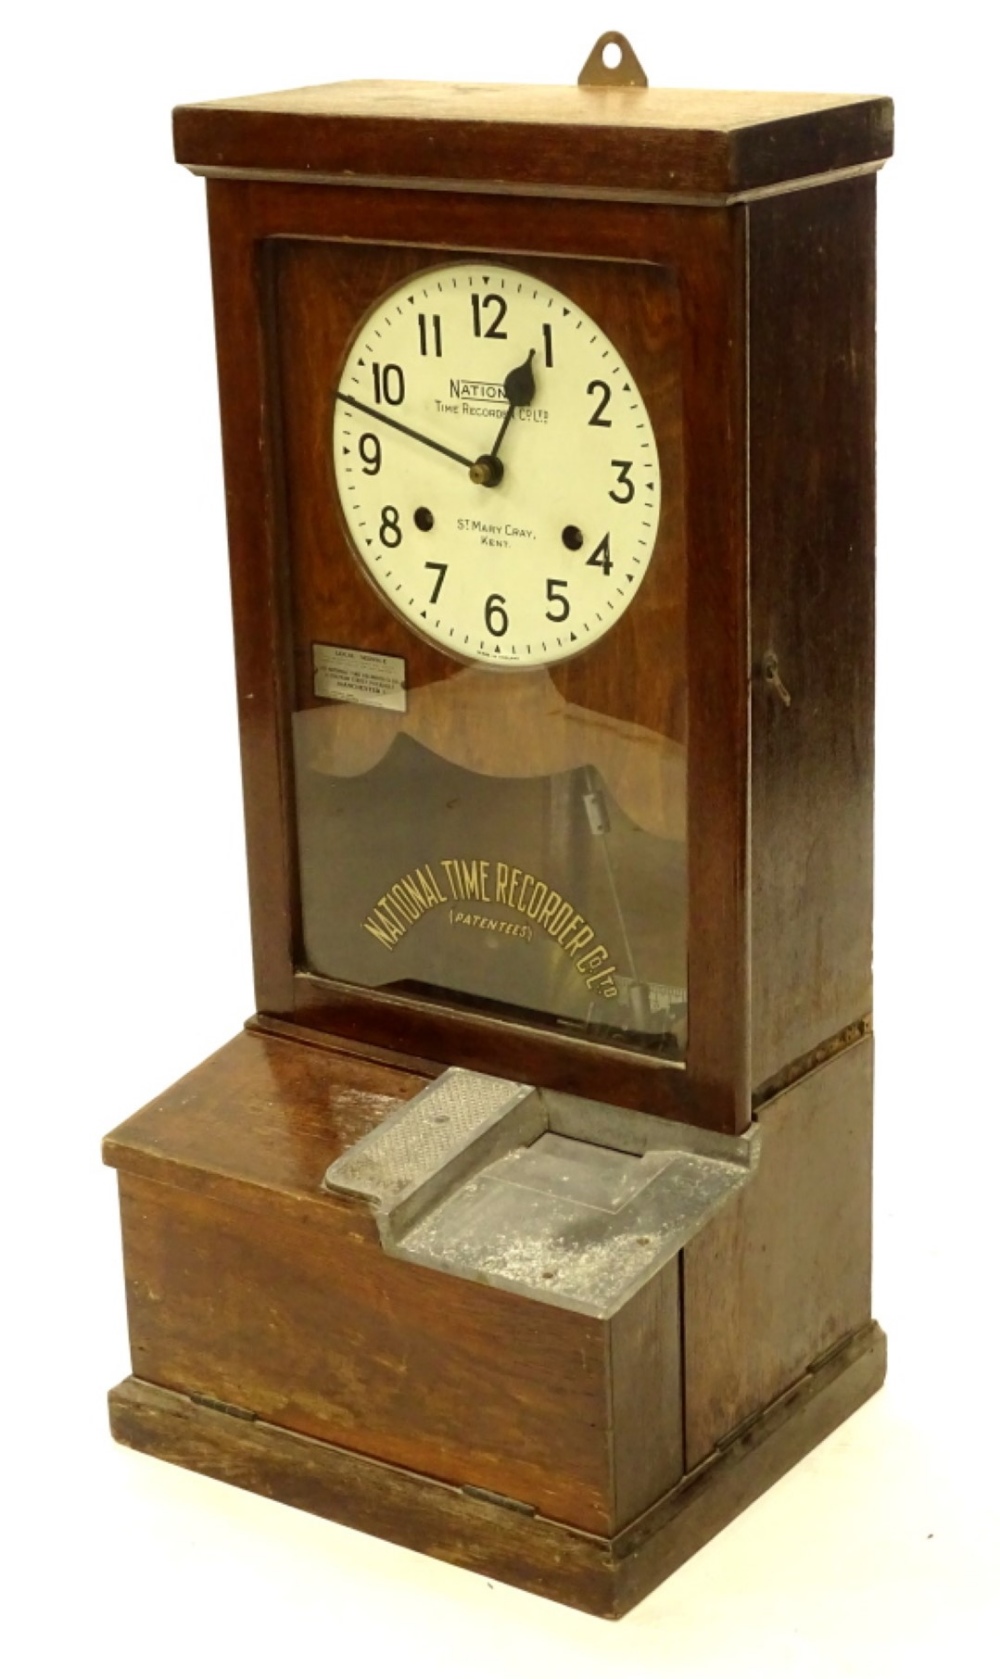 A National Time Recorder Company Ltd clocking in clock, the painted dial stamped St Mary Cray